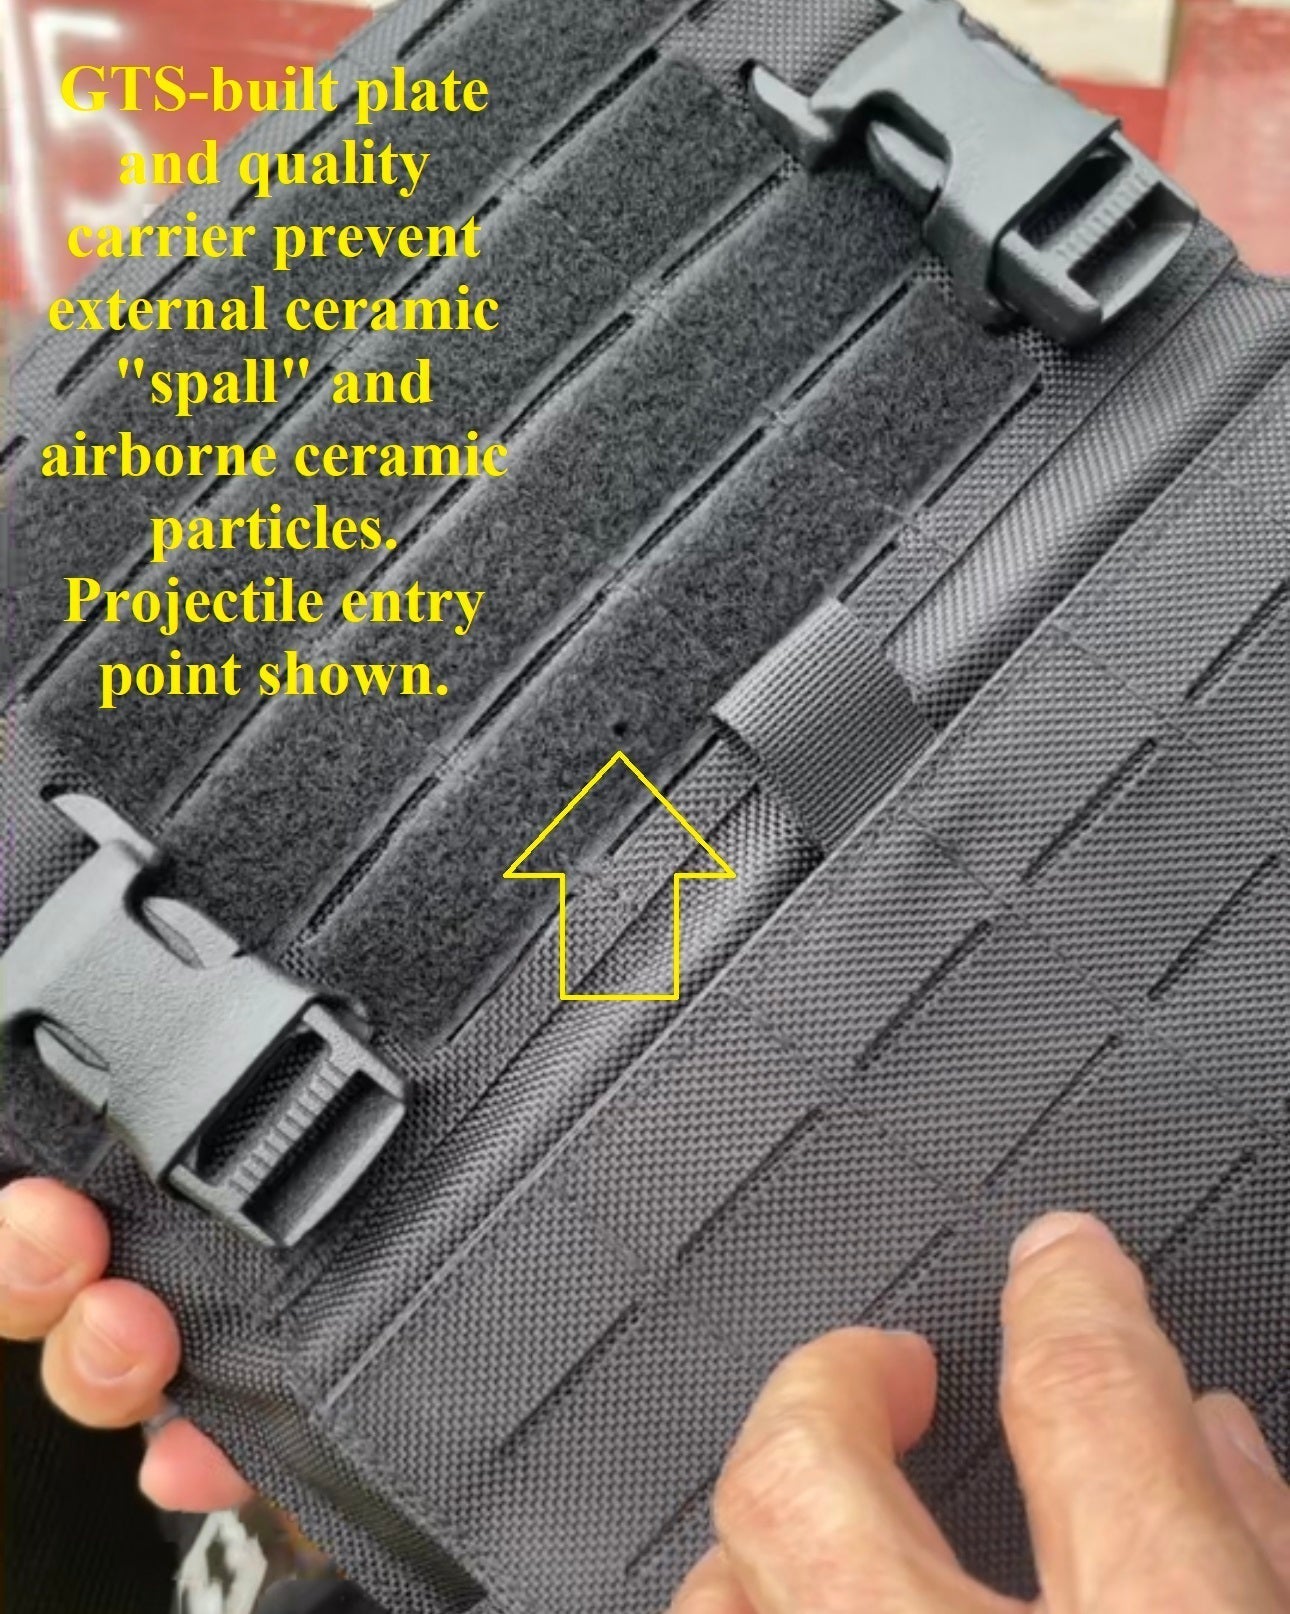 Lightweight Version! Set Level 3+ or Level 4, 10"x12" Standard Swimmer's Cut with Angled Lower Corners Ceramic Ballistic Rifle Plates - Gilliam Technical Services, Inc.